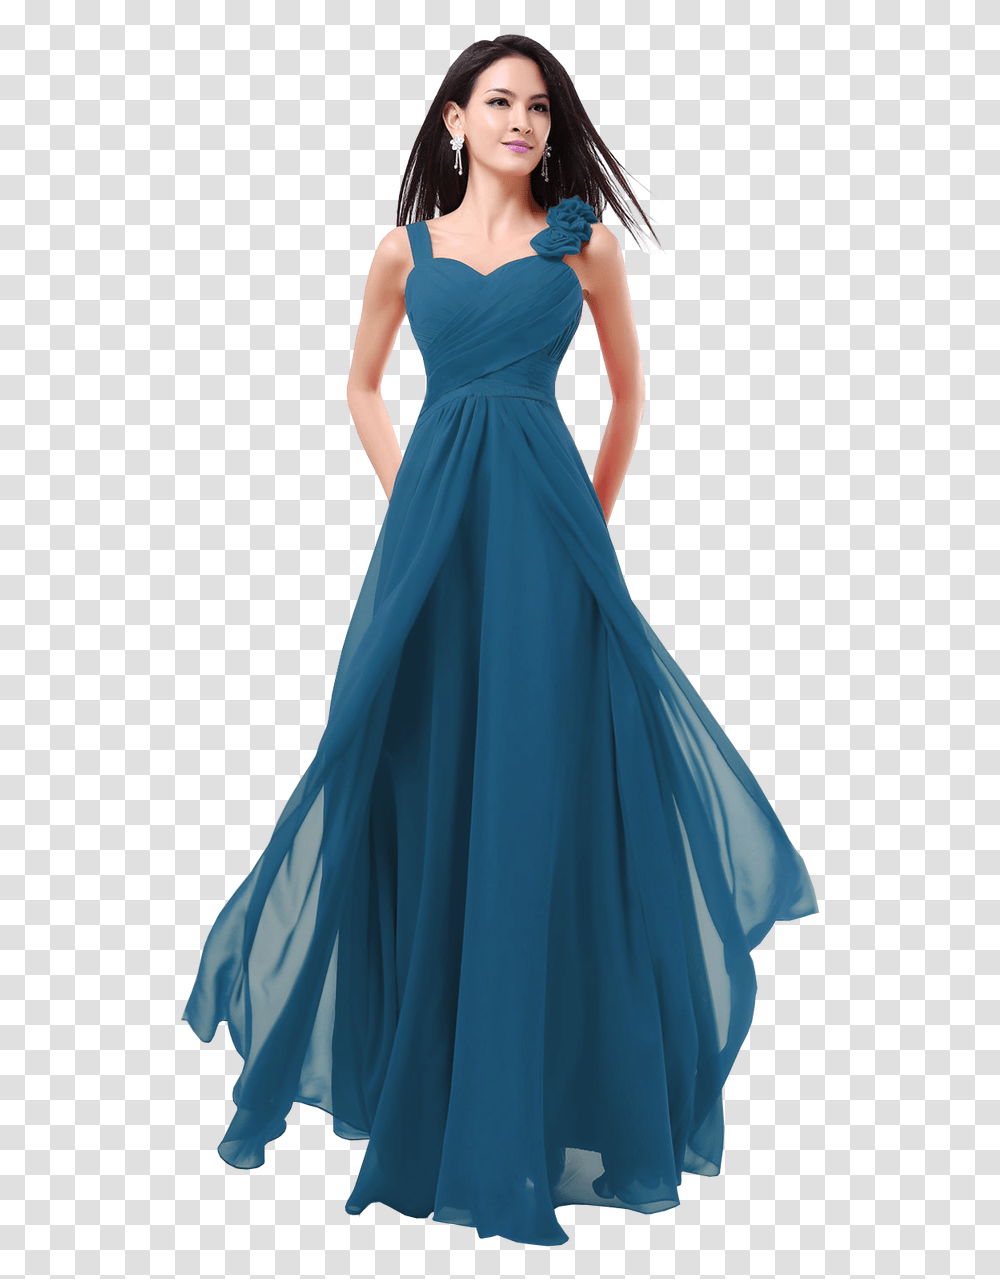 New Formal Long Evening Ball Gown Party Prom Bridesmaid Ball Gown, Apparel, Evening Dress, Robe Transparent Png